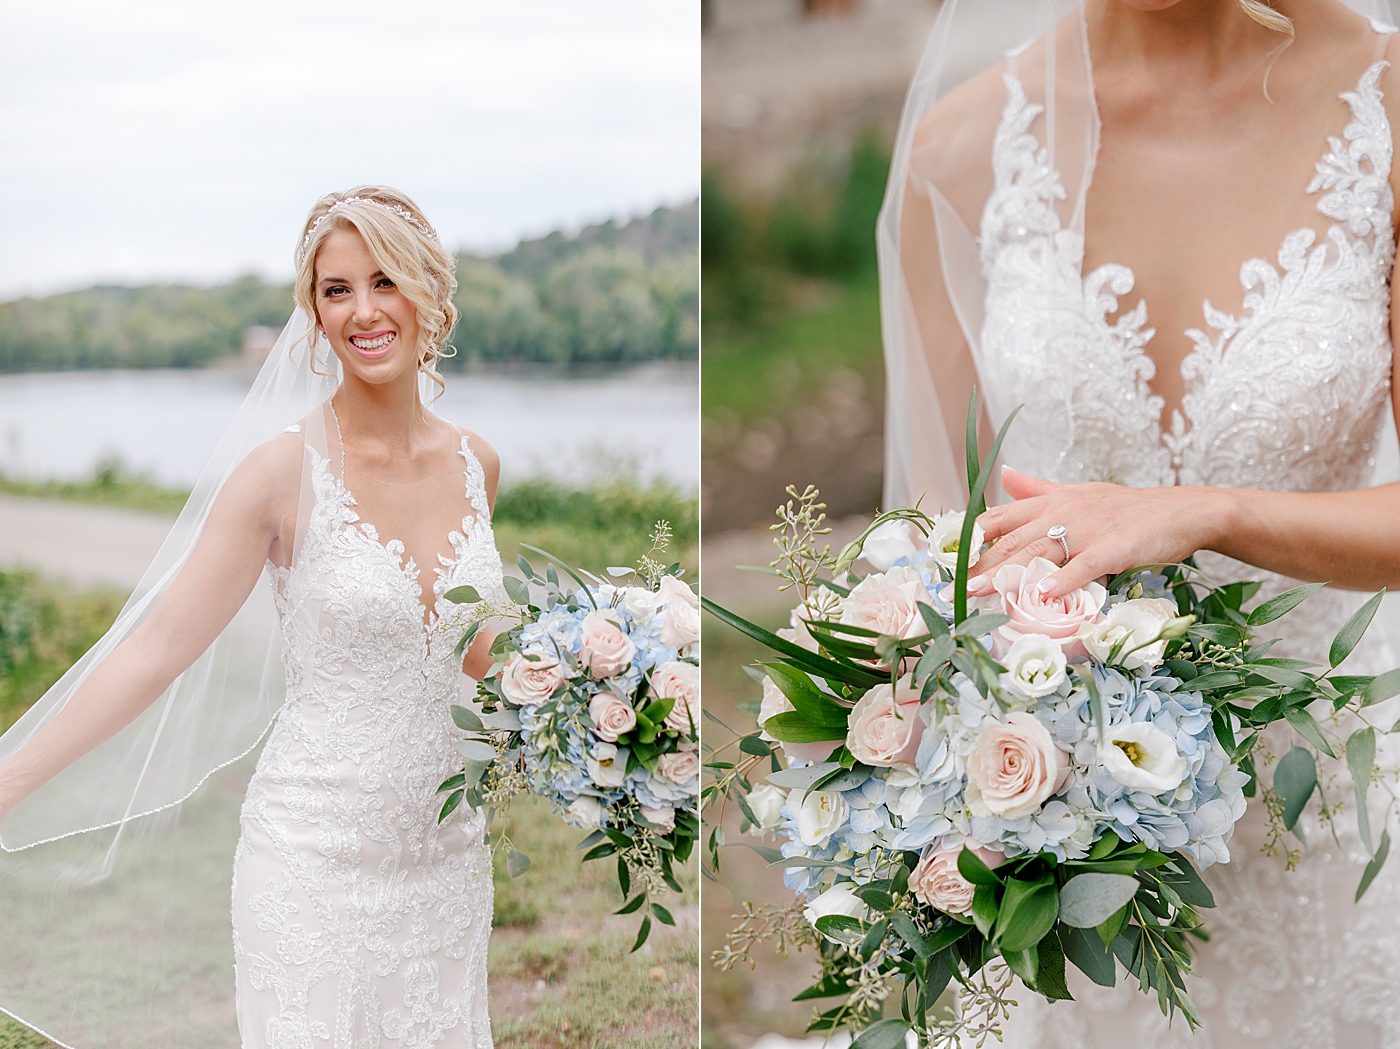 Bride smiling holding her bouquet | Image by Hope Helmuth Photography